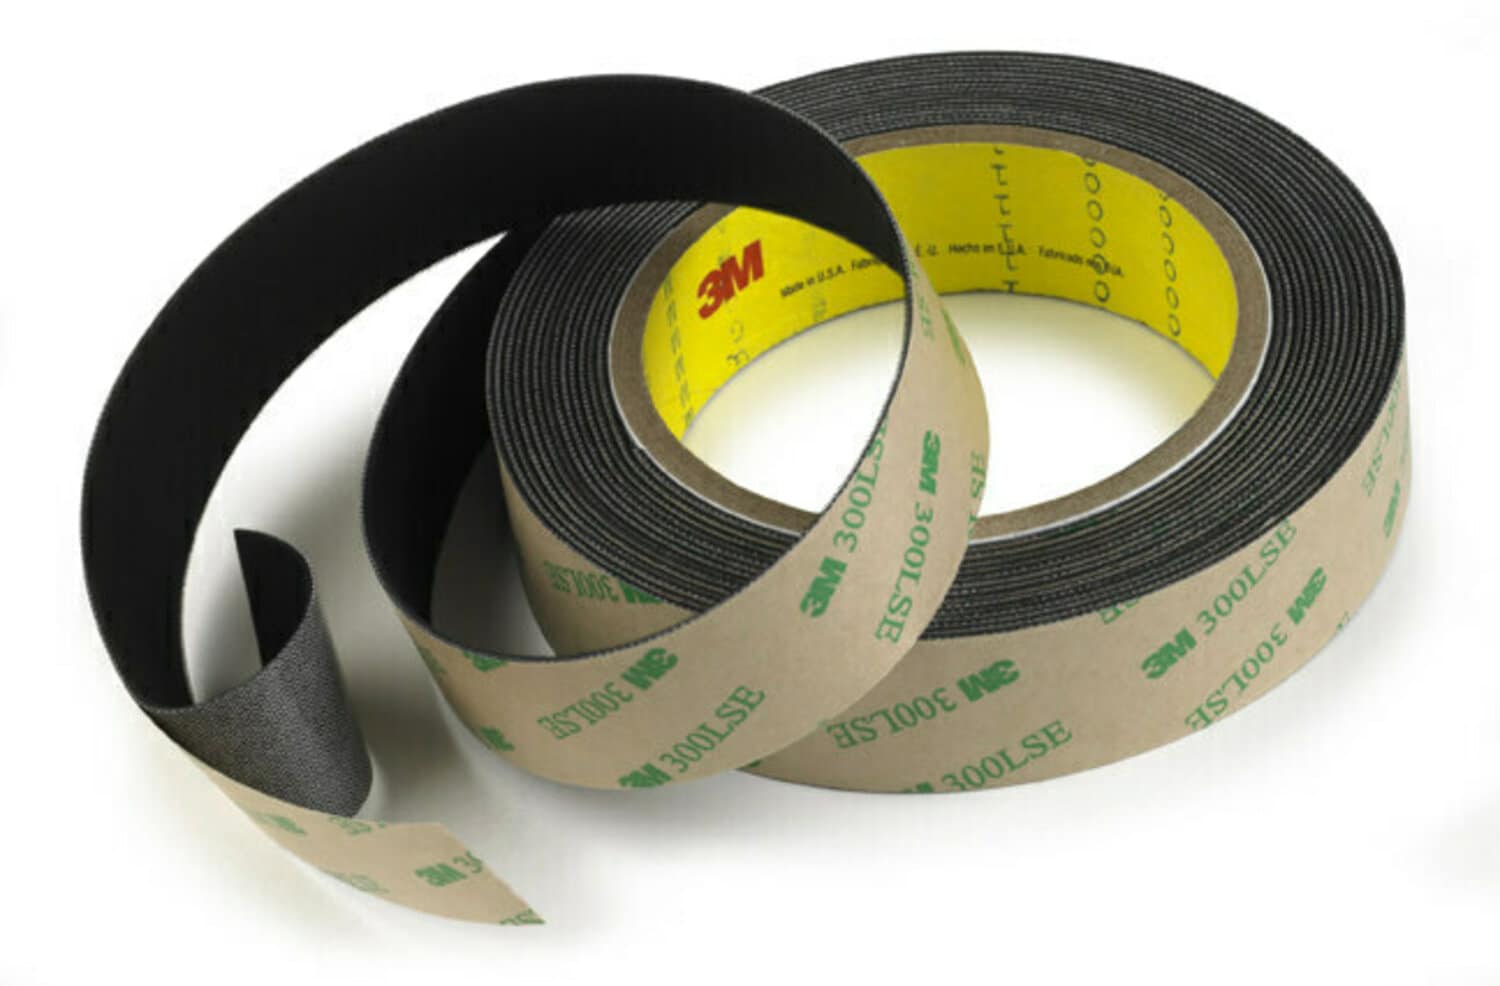 7000124825 - 3M Gripping Material GM641, Black, 1 in x 72 yd, 9 Roll/Case